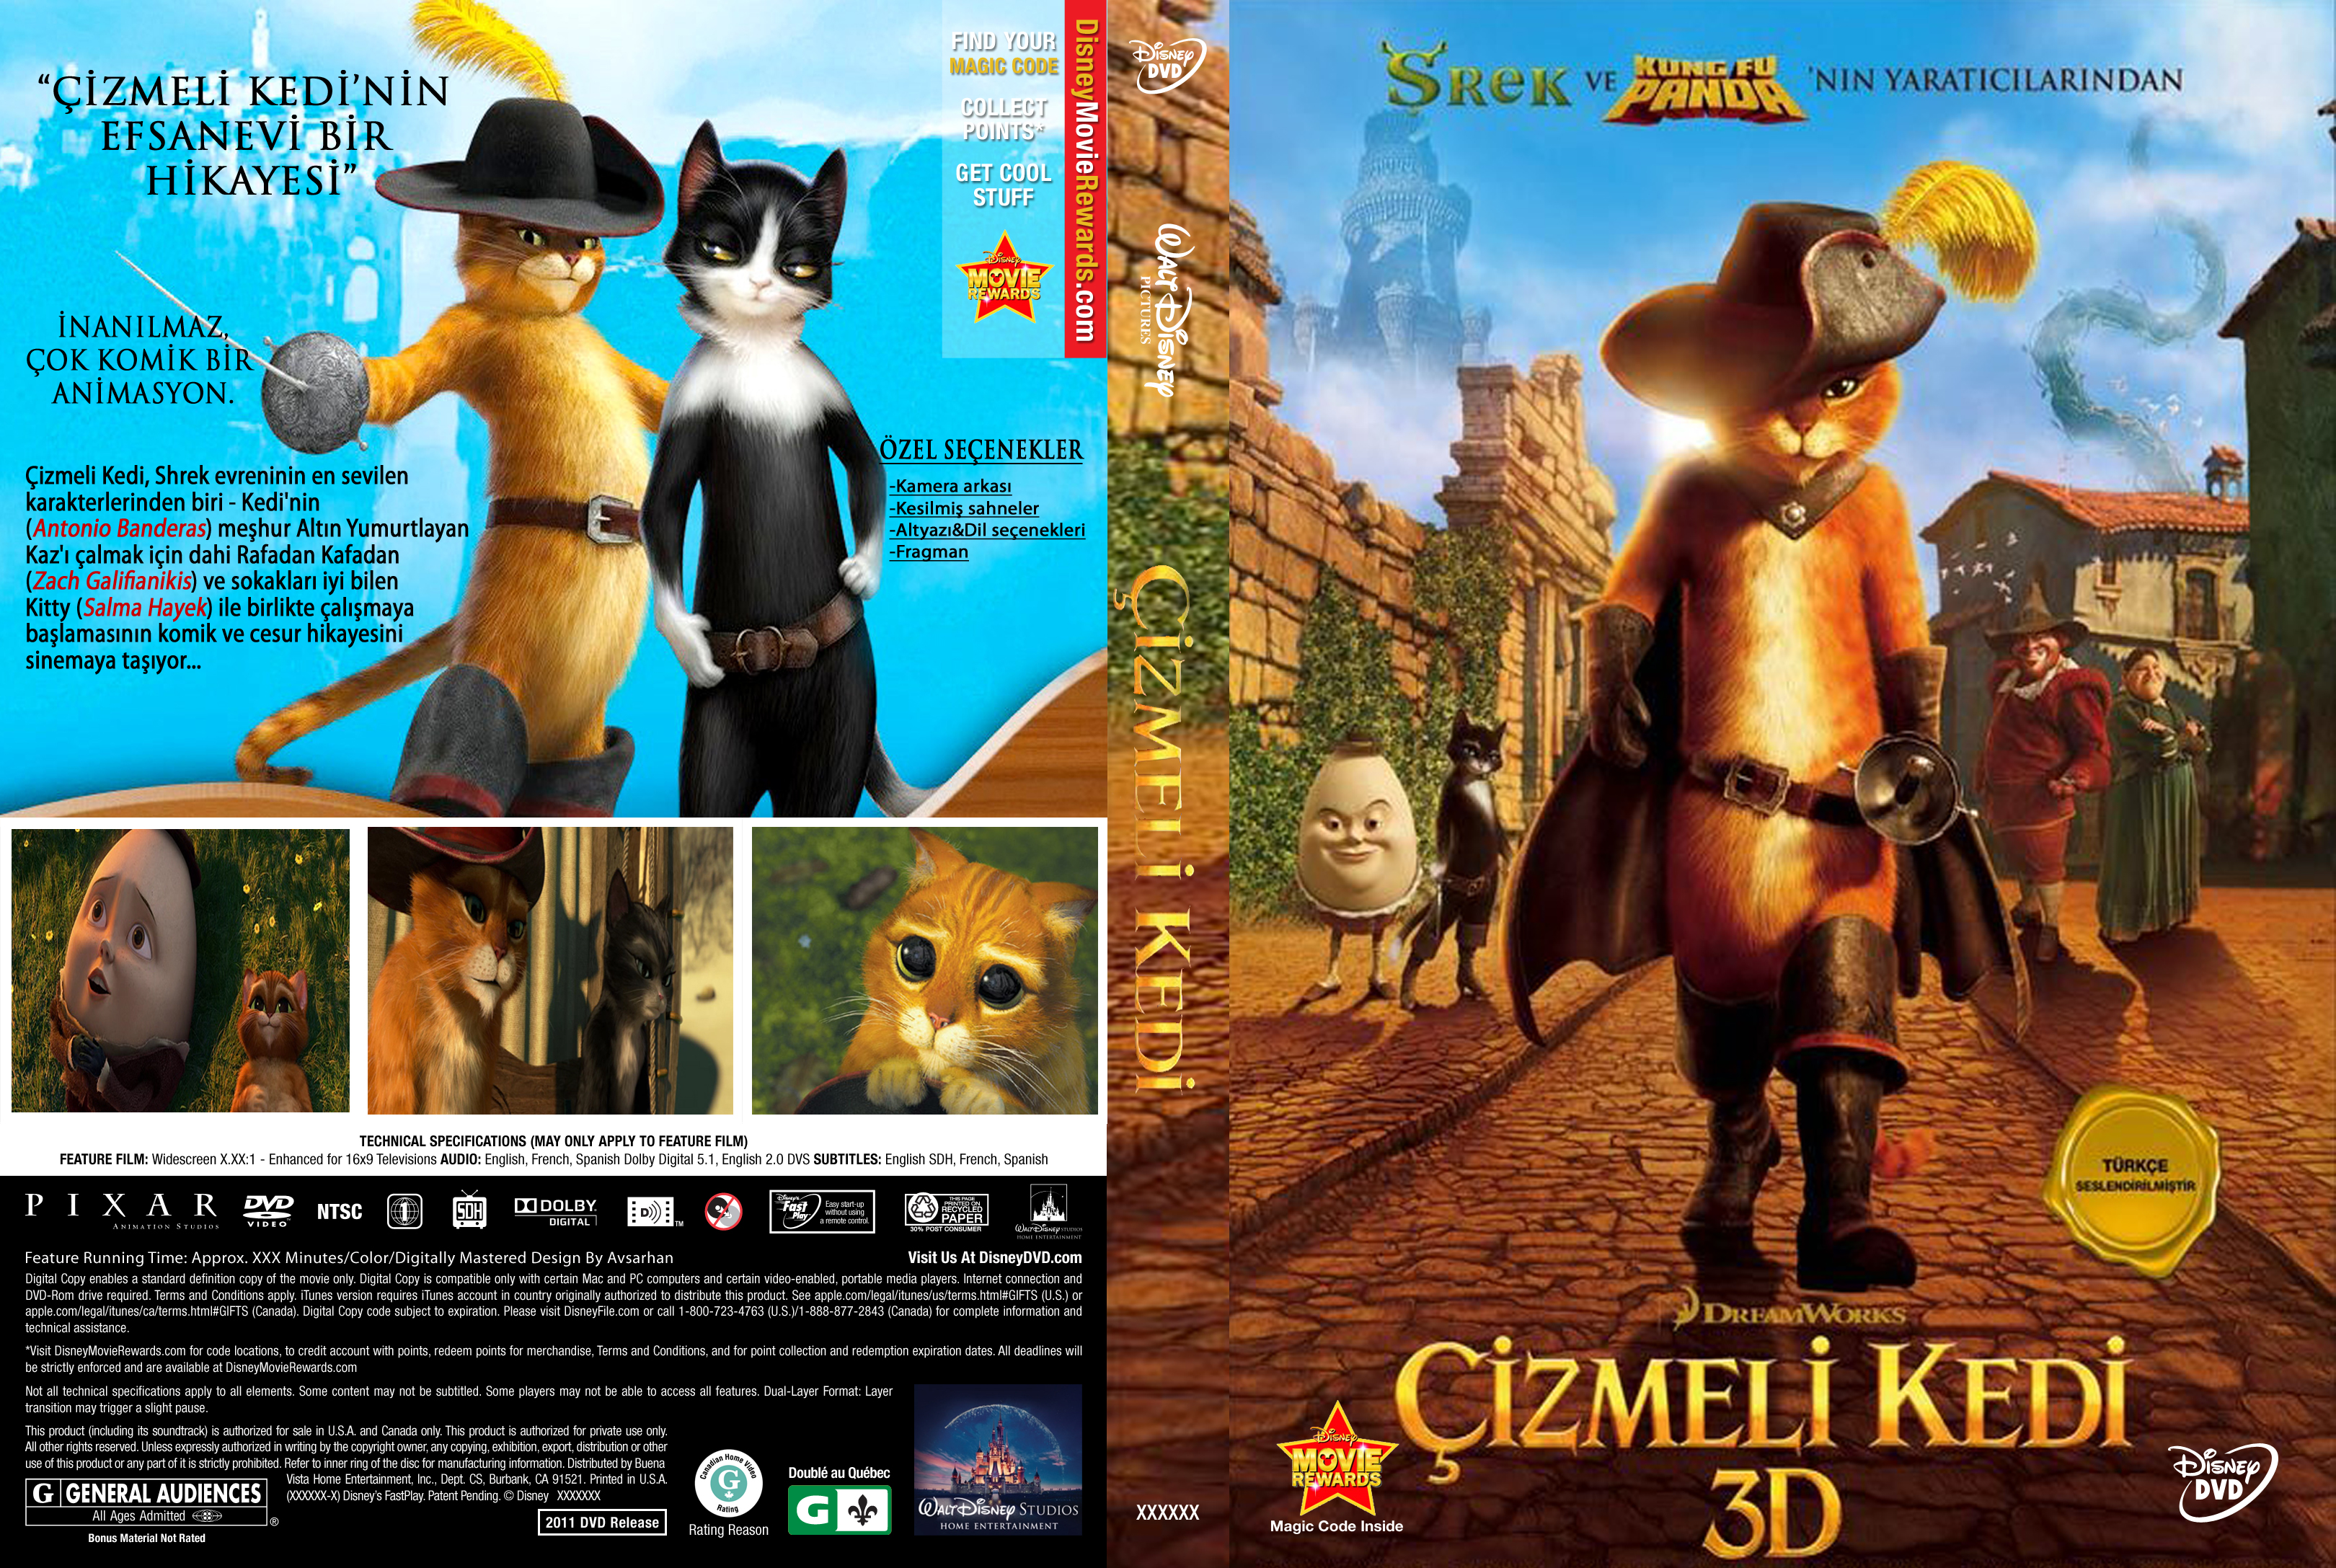 COVERS.BOX.SK Puss In Boots Turkish high quality DVD / Blueray